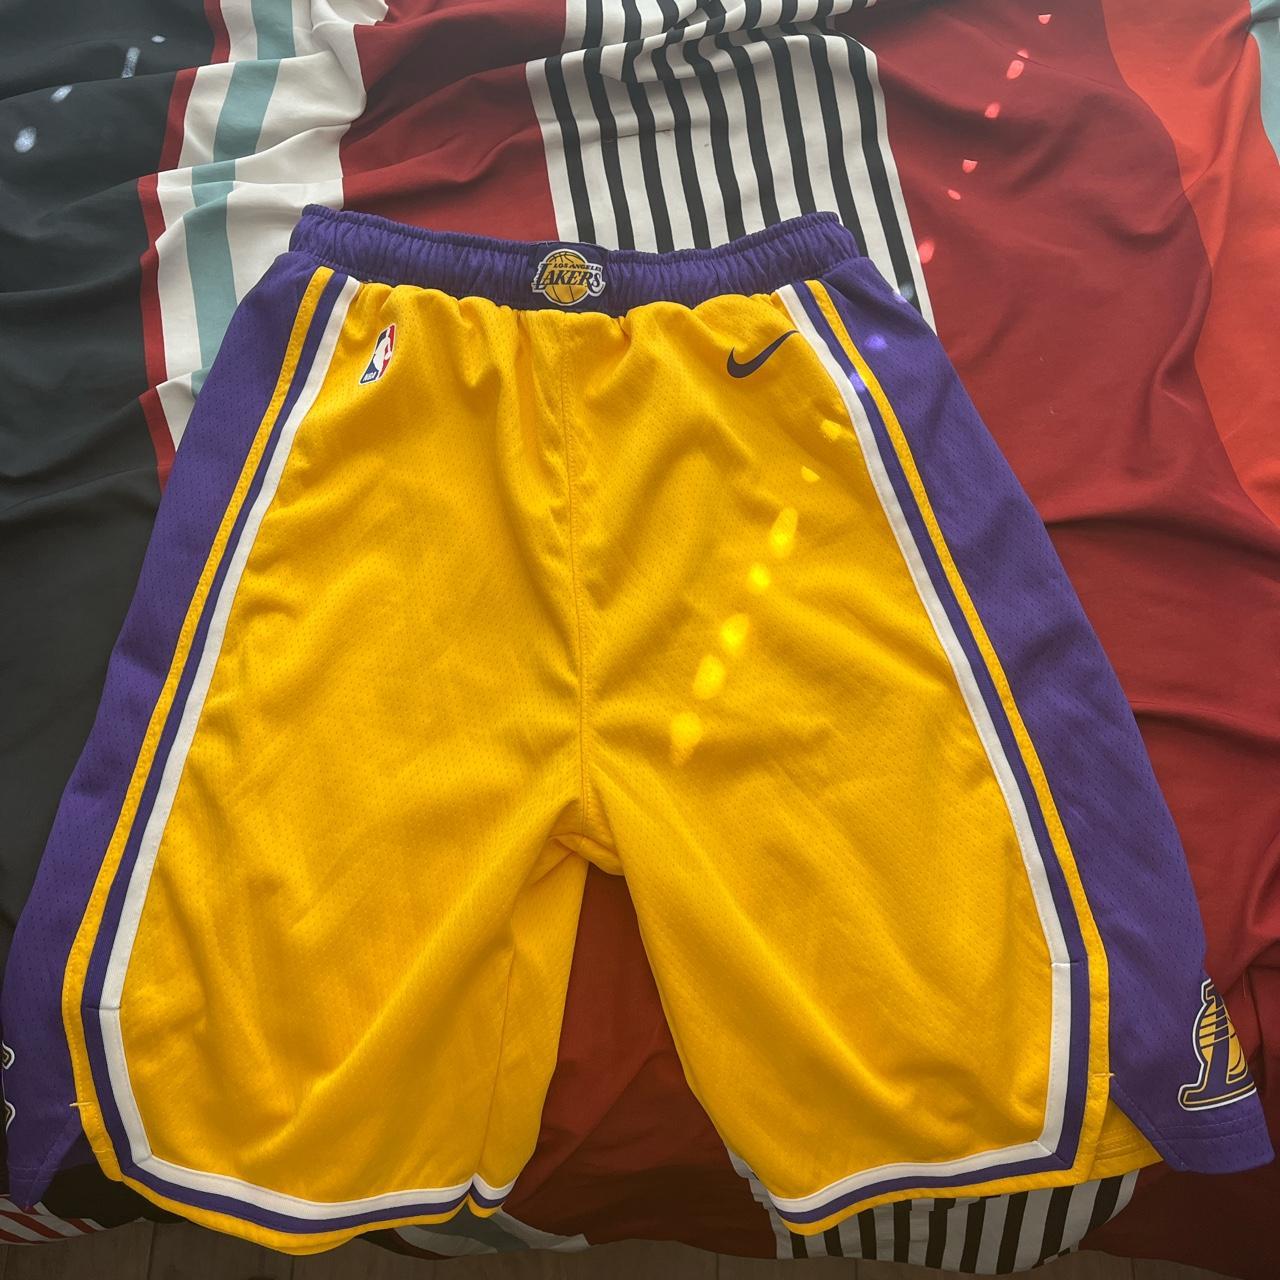 youth lakers shorts purple